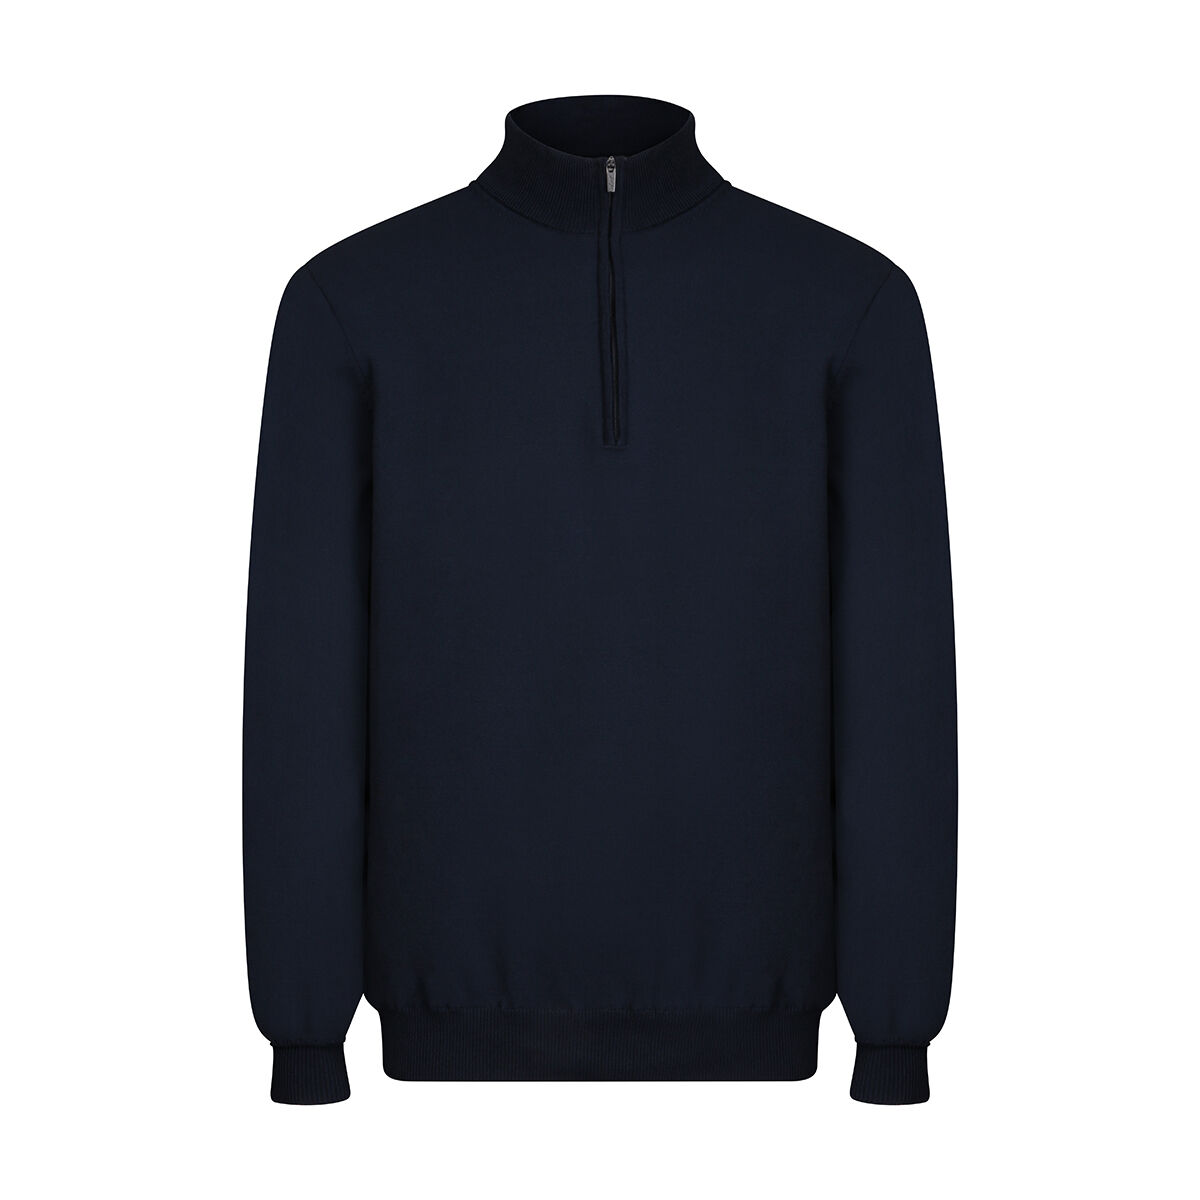 Greg Norman Navy Blue Weatherknit Lined 1/4 Zip Midlayer, Mens | American Golf, Size: Small